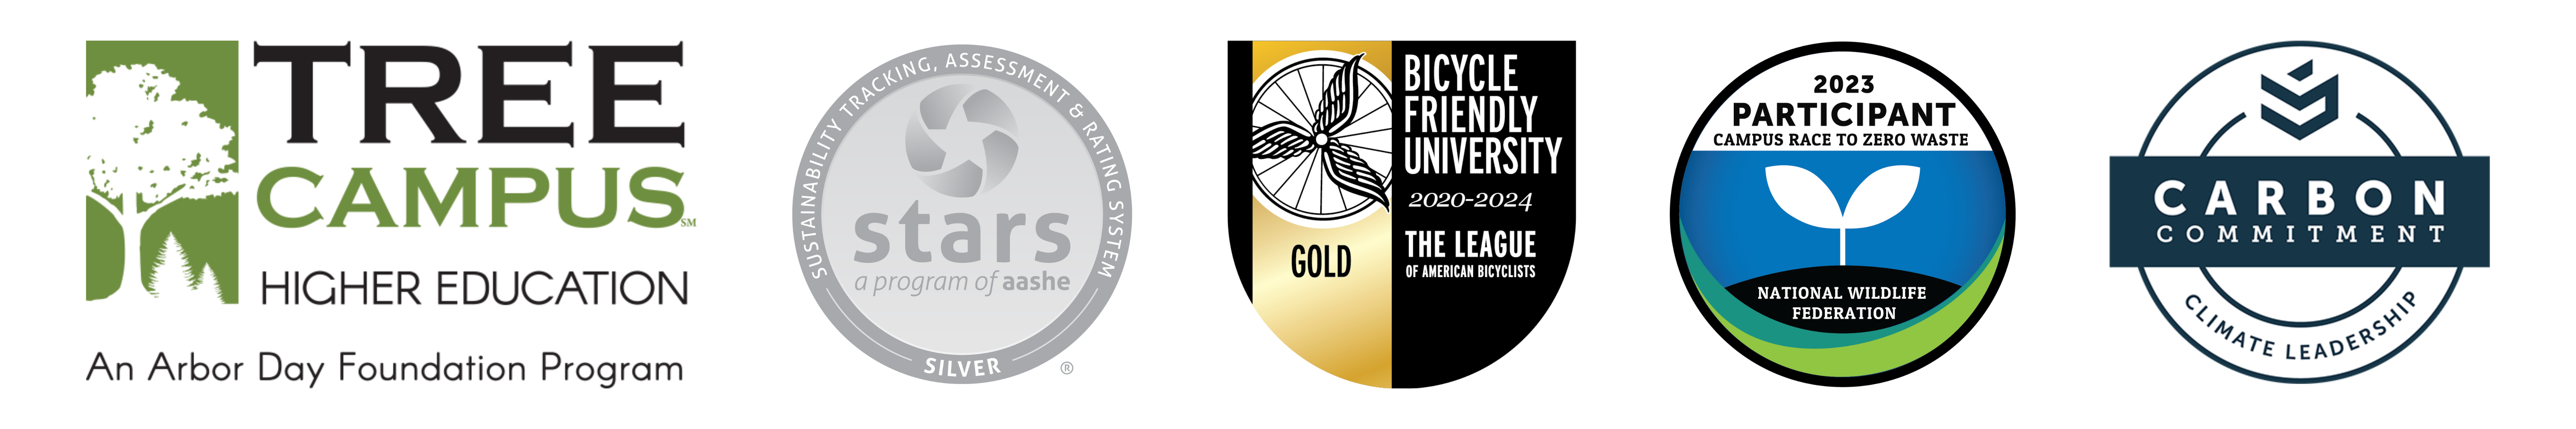 logos and badges for Tree Campus, stars, Bicycle Friendly University, National Wildlife Federation, and Carbon Commitment